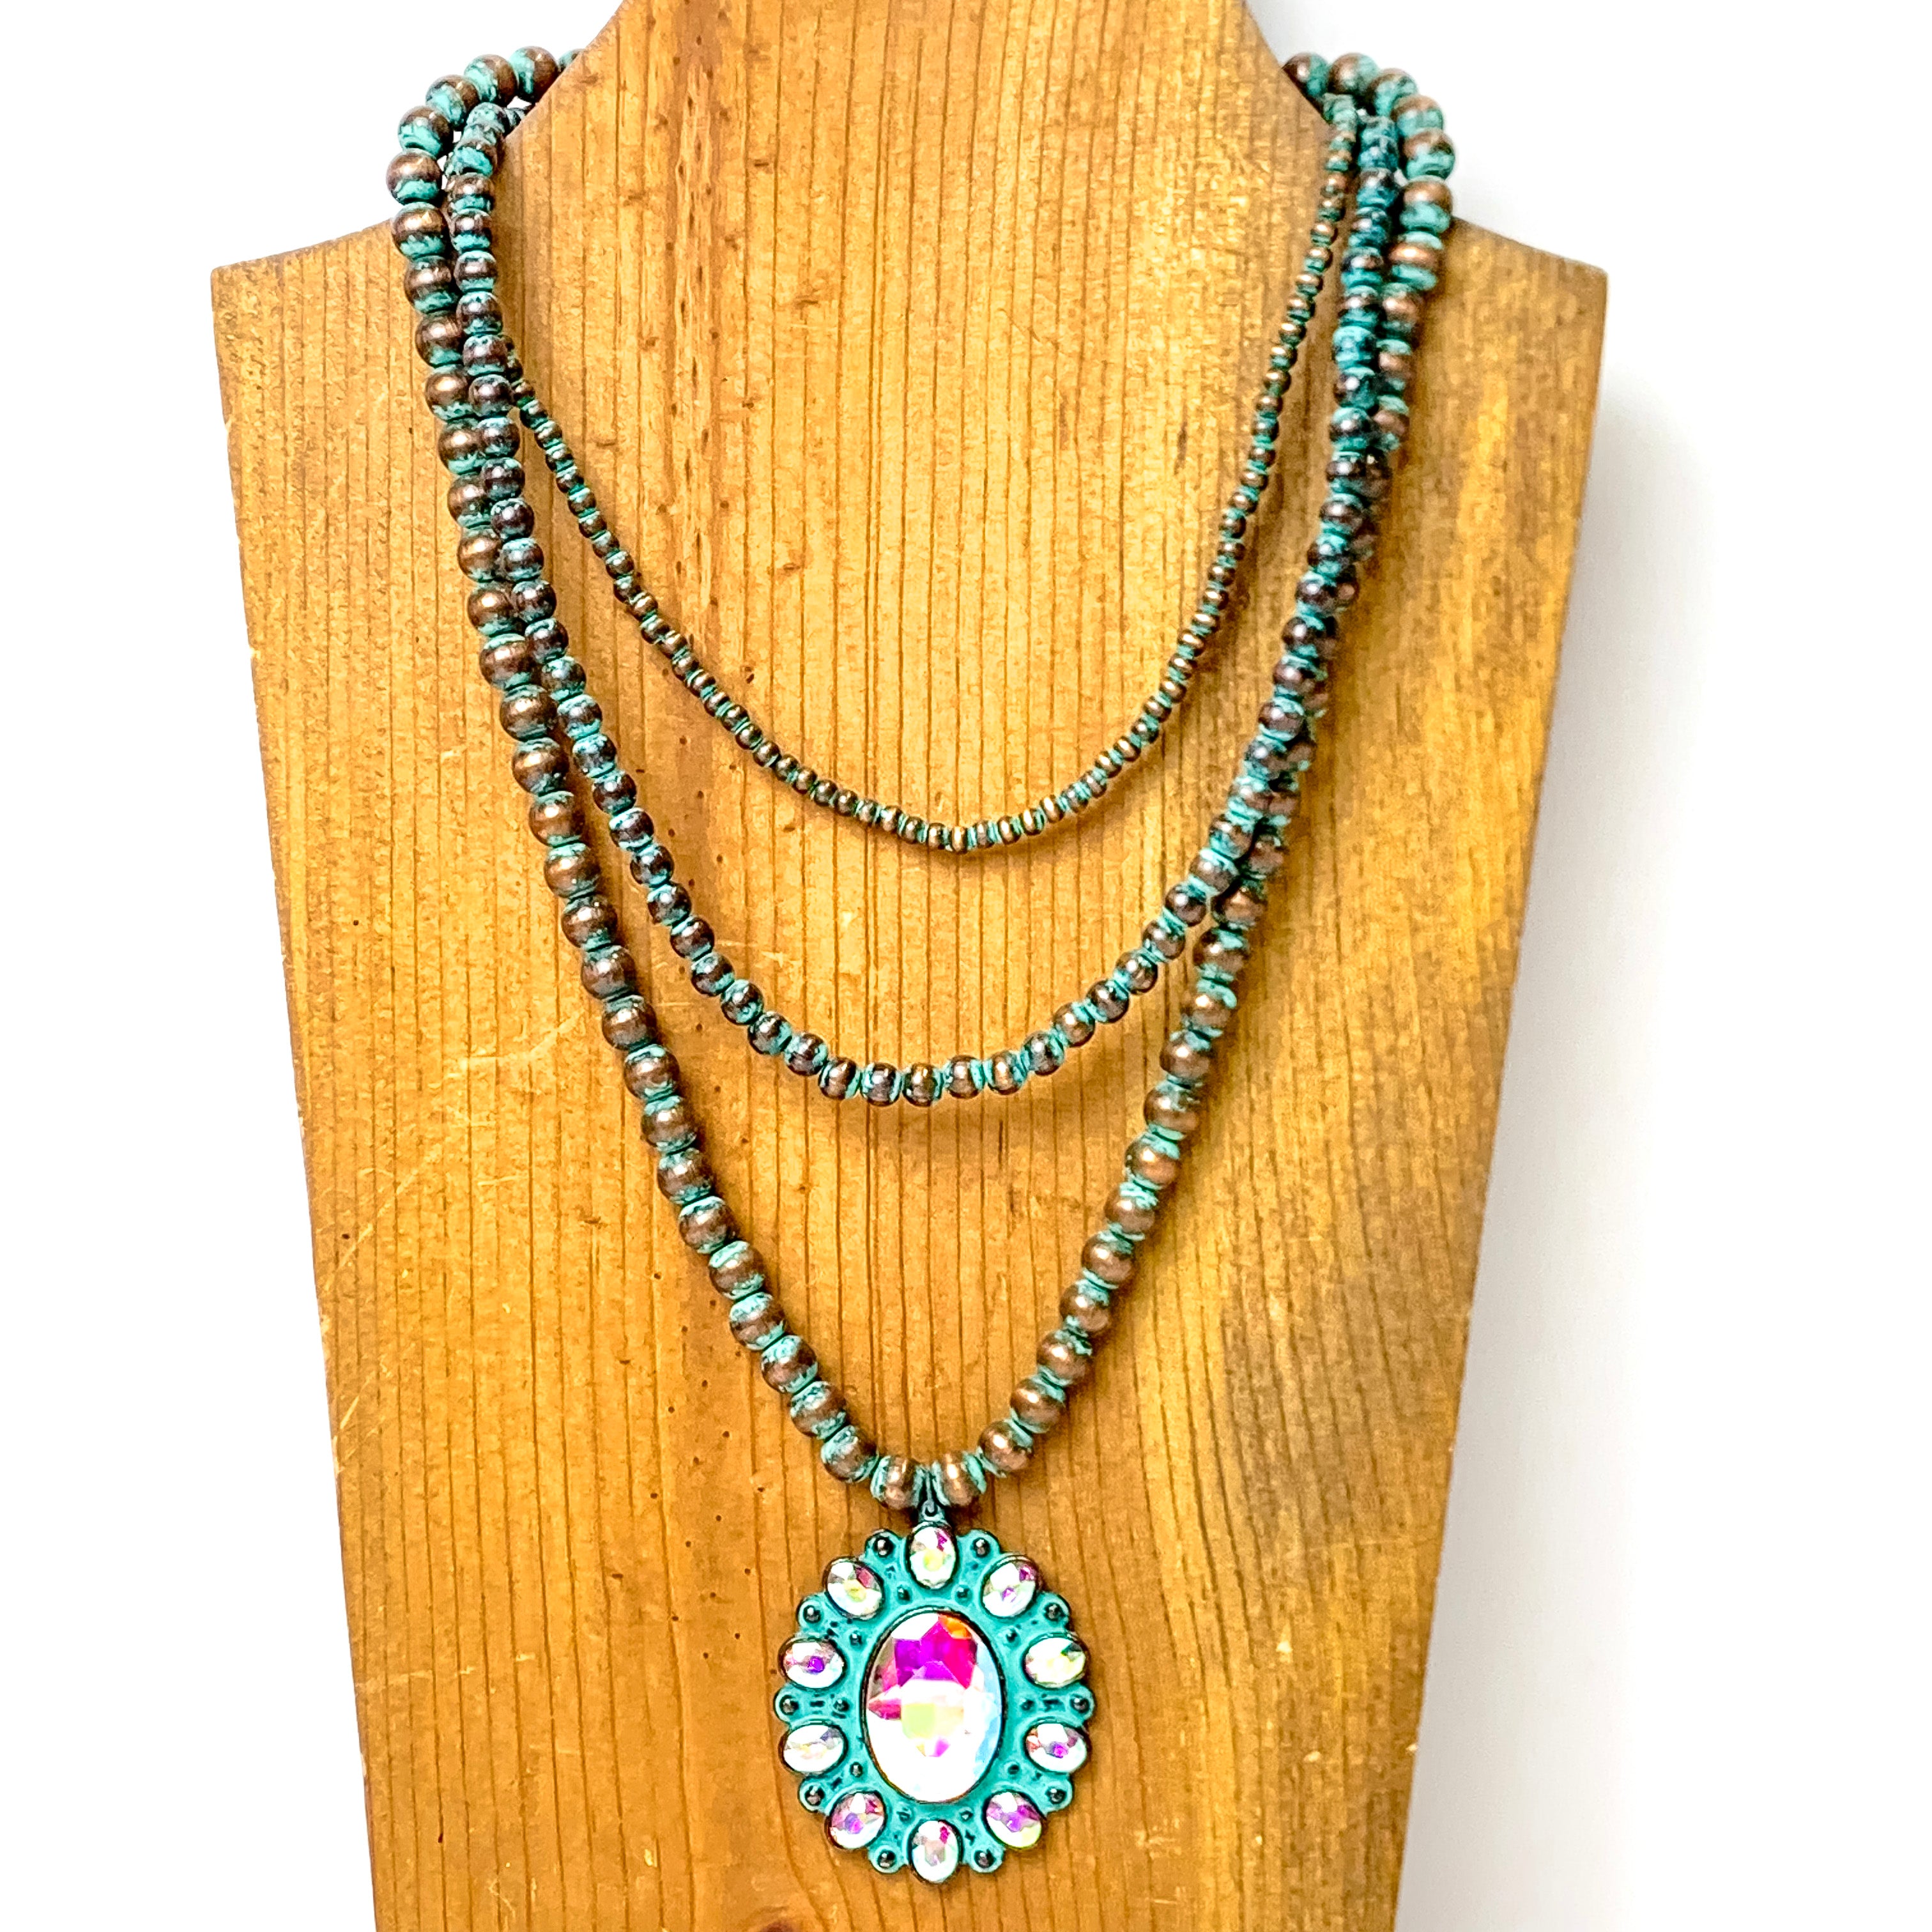 Southwest Splendor Faux Navajo Pearl Necklace in Patina Tone - Giddy Up Glamour Boutique